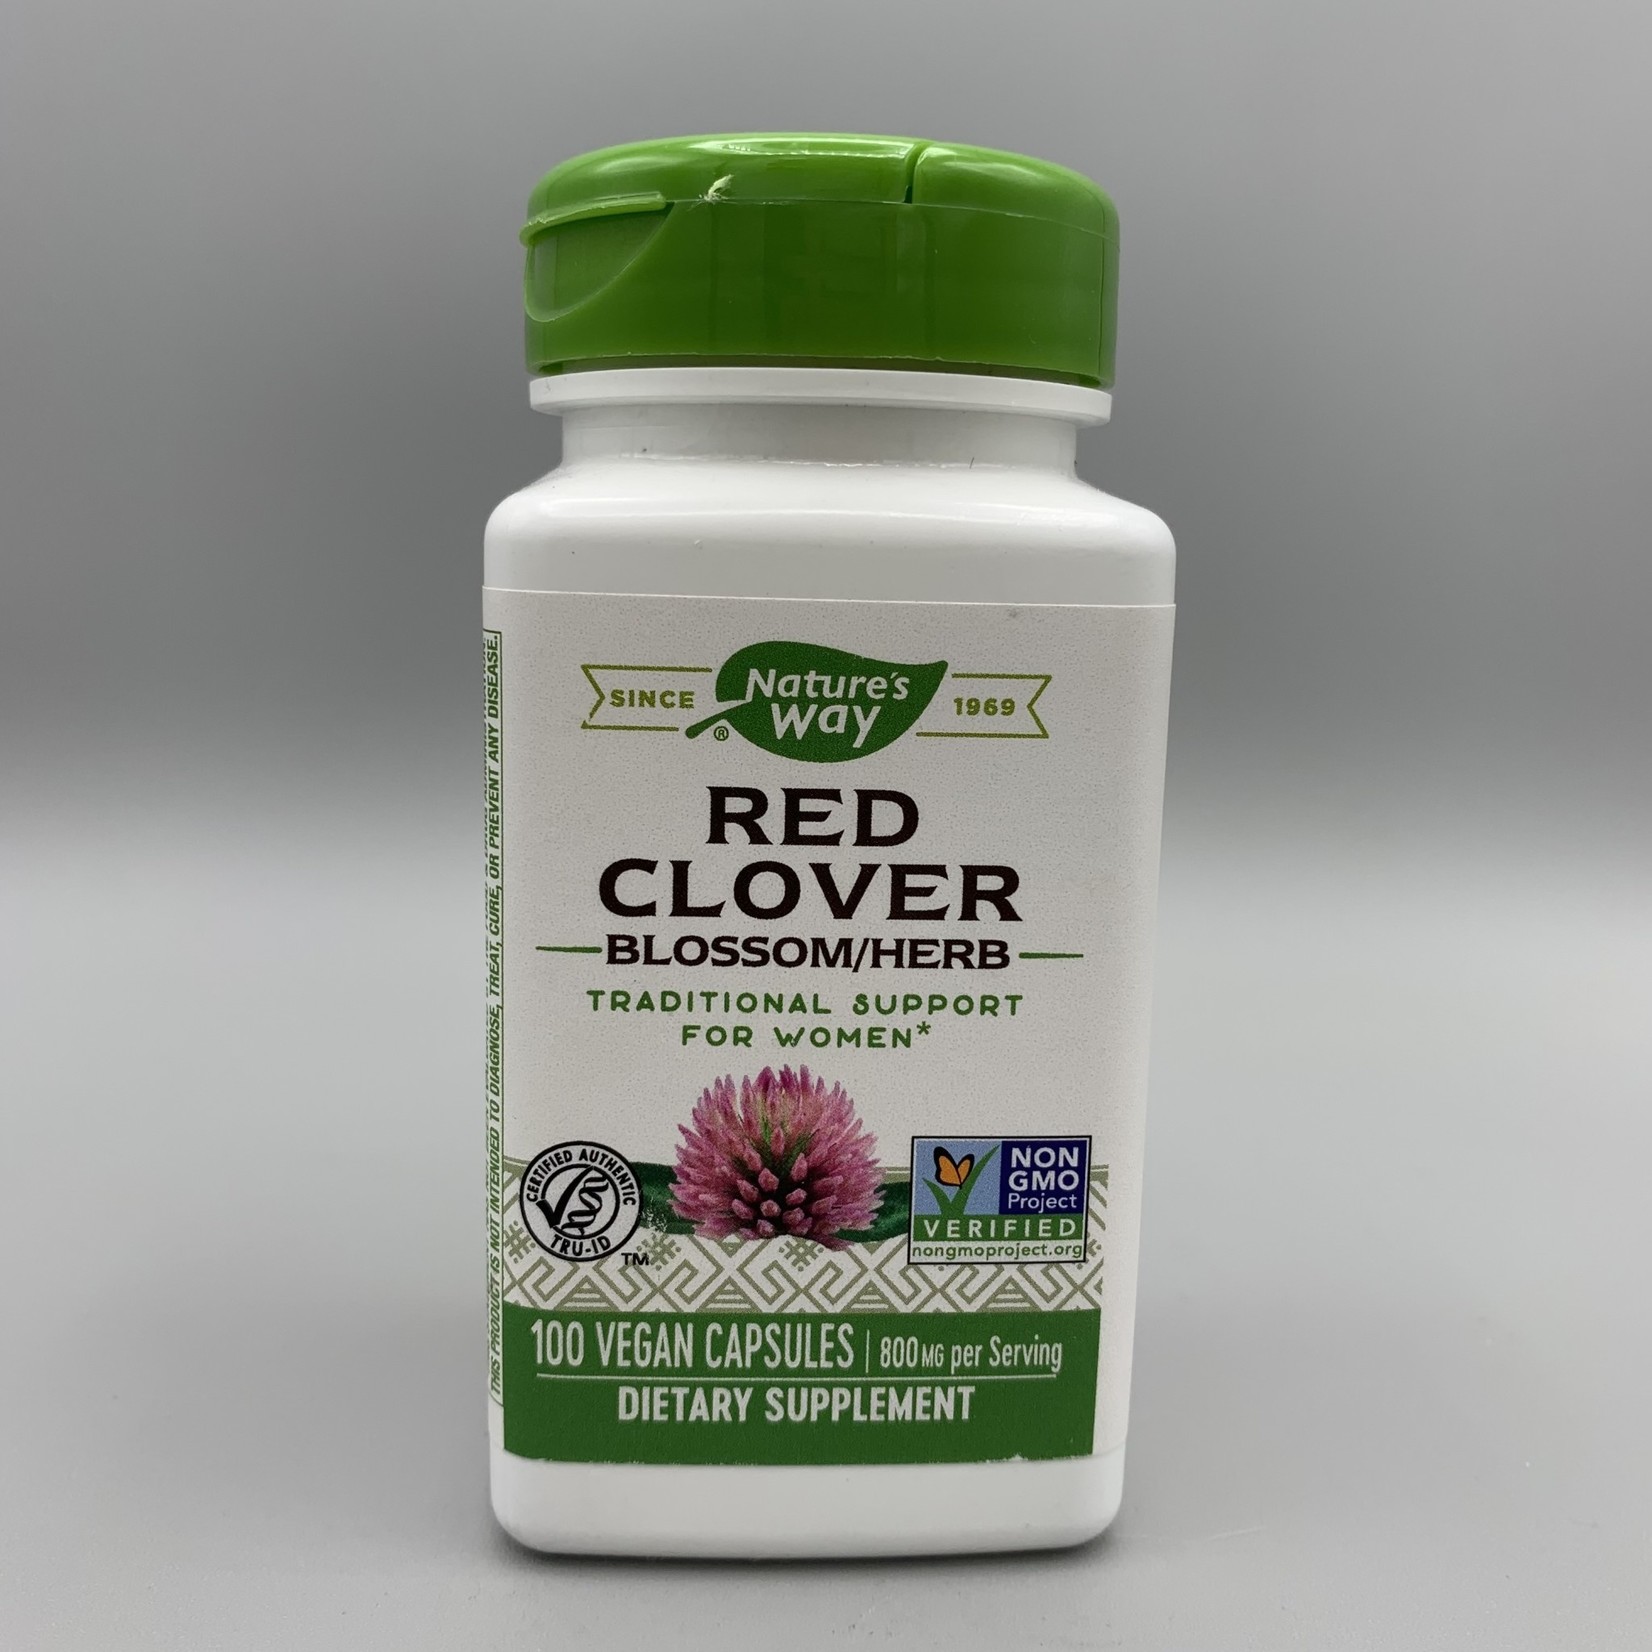 Nature's Way Red Clover (Blossom/Herb) - 800 mg, 100 Veg. Capsules